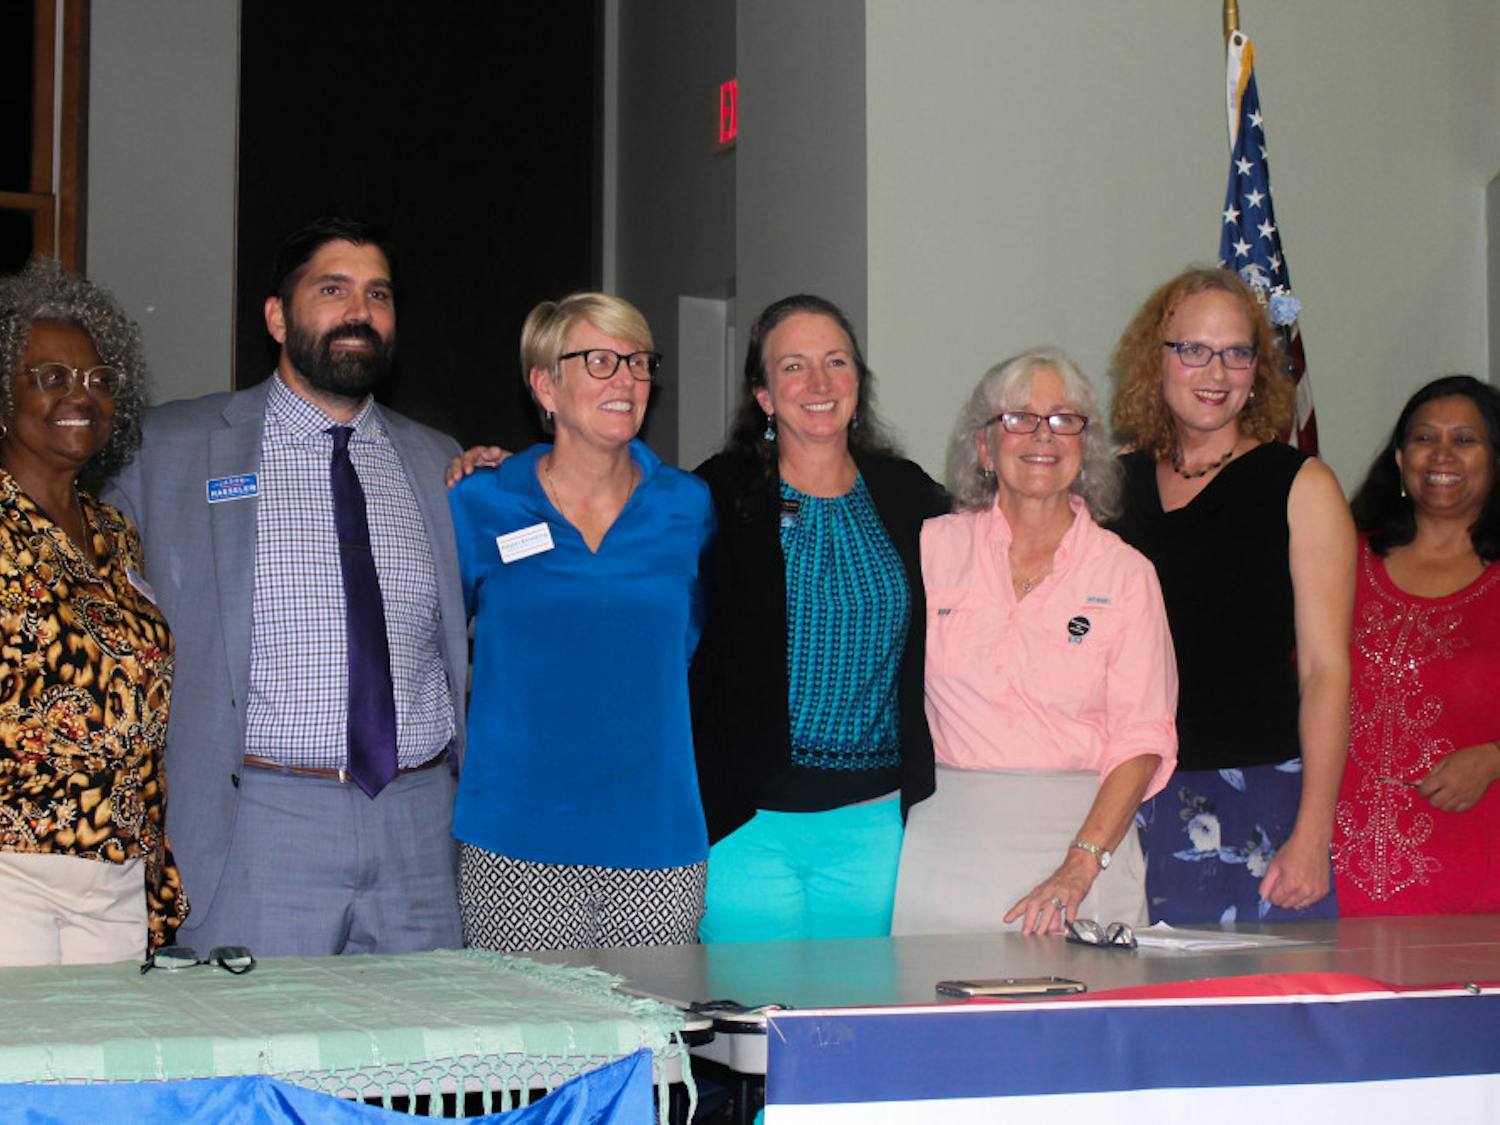 Five candidates, who will appear on the Nov. 6 general election ballot, answered feminist-centered questions at a forum Tuesday. The candidates from left to right are: Yvonne Hayes Hinson, Jason Haeseler, Kayser Enneking, Merrillee Malwitz-Jipson and Marihelen Wheeler.